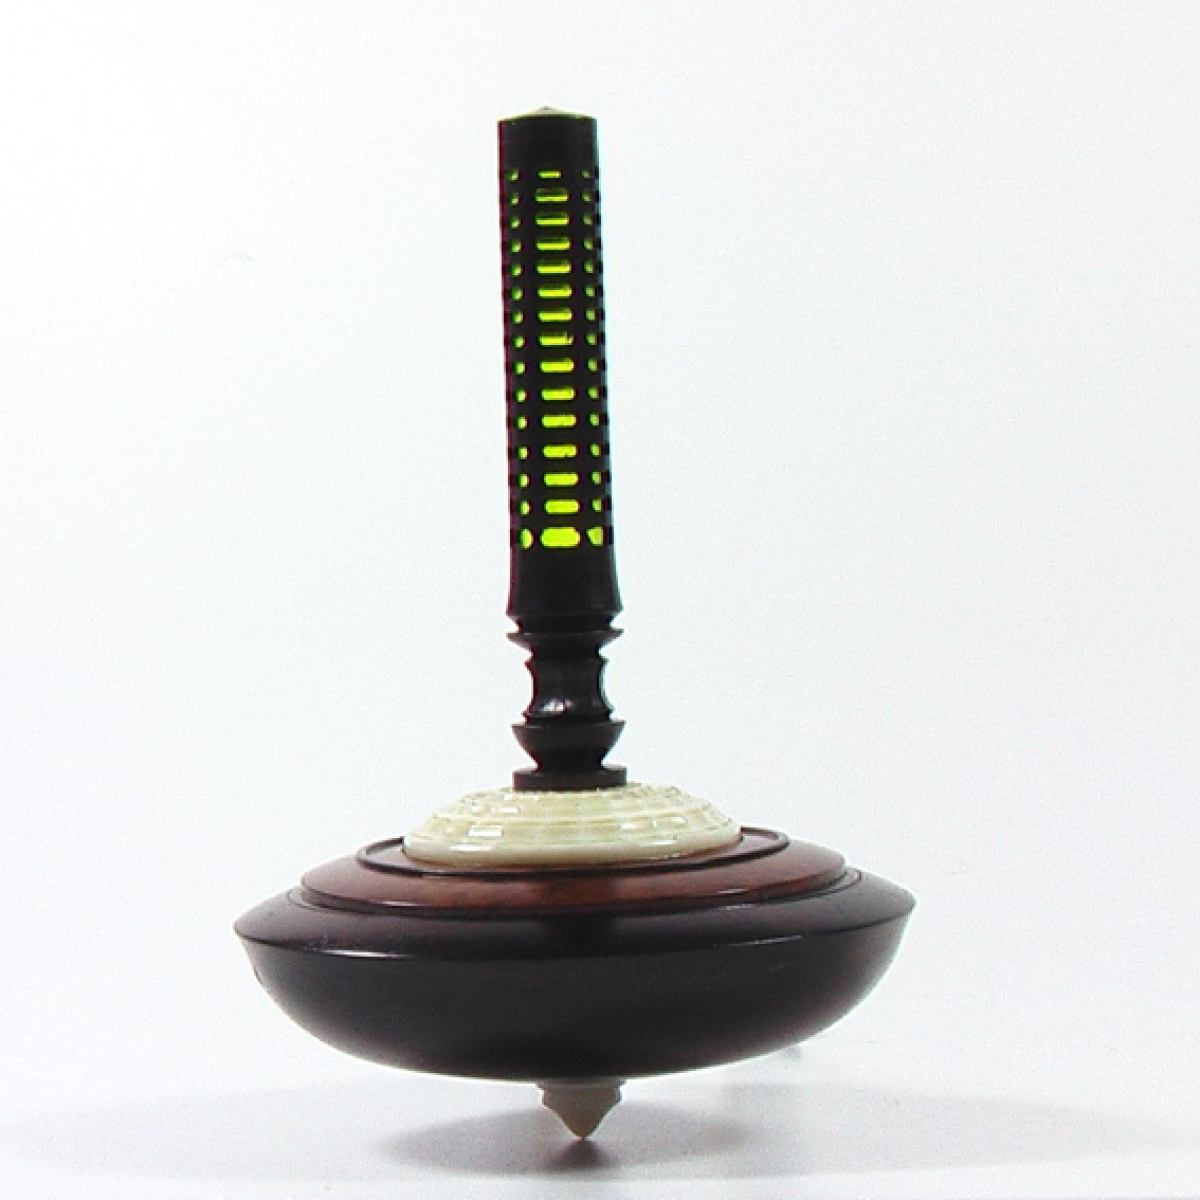 Premium Collector's Spinning Top made of Precious Woods, Bone and Plexiglass